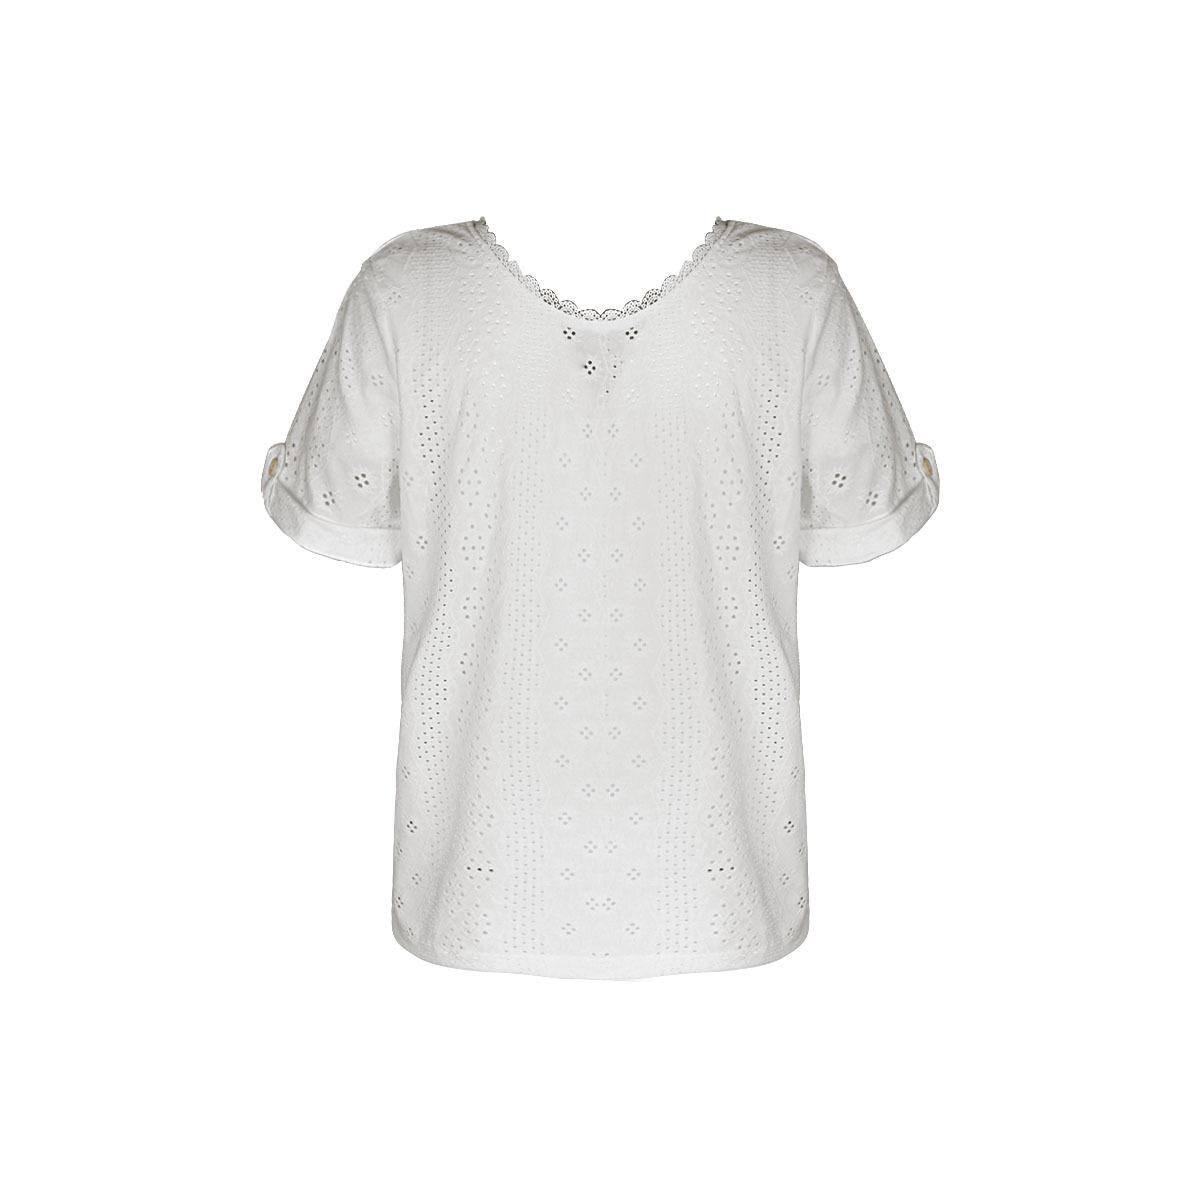 Look chic and stylish with our Lace Openwork V-Neck White Top - Order Today